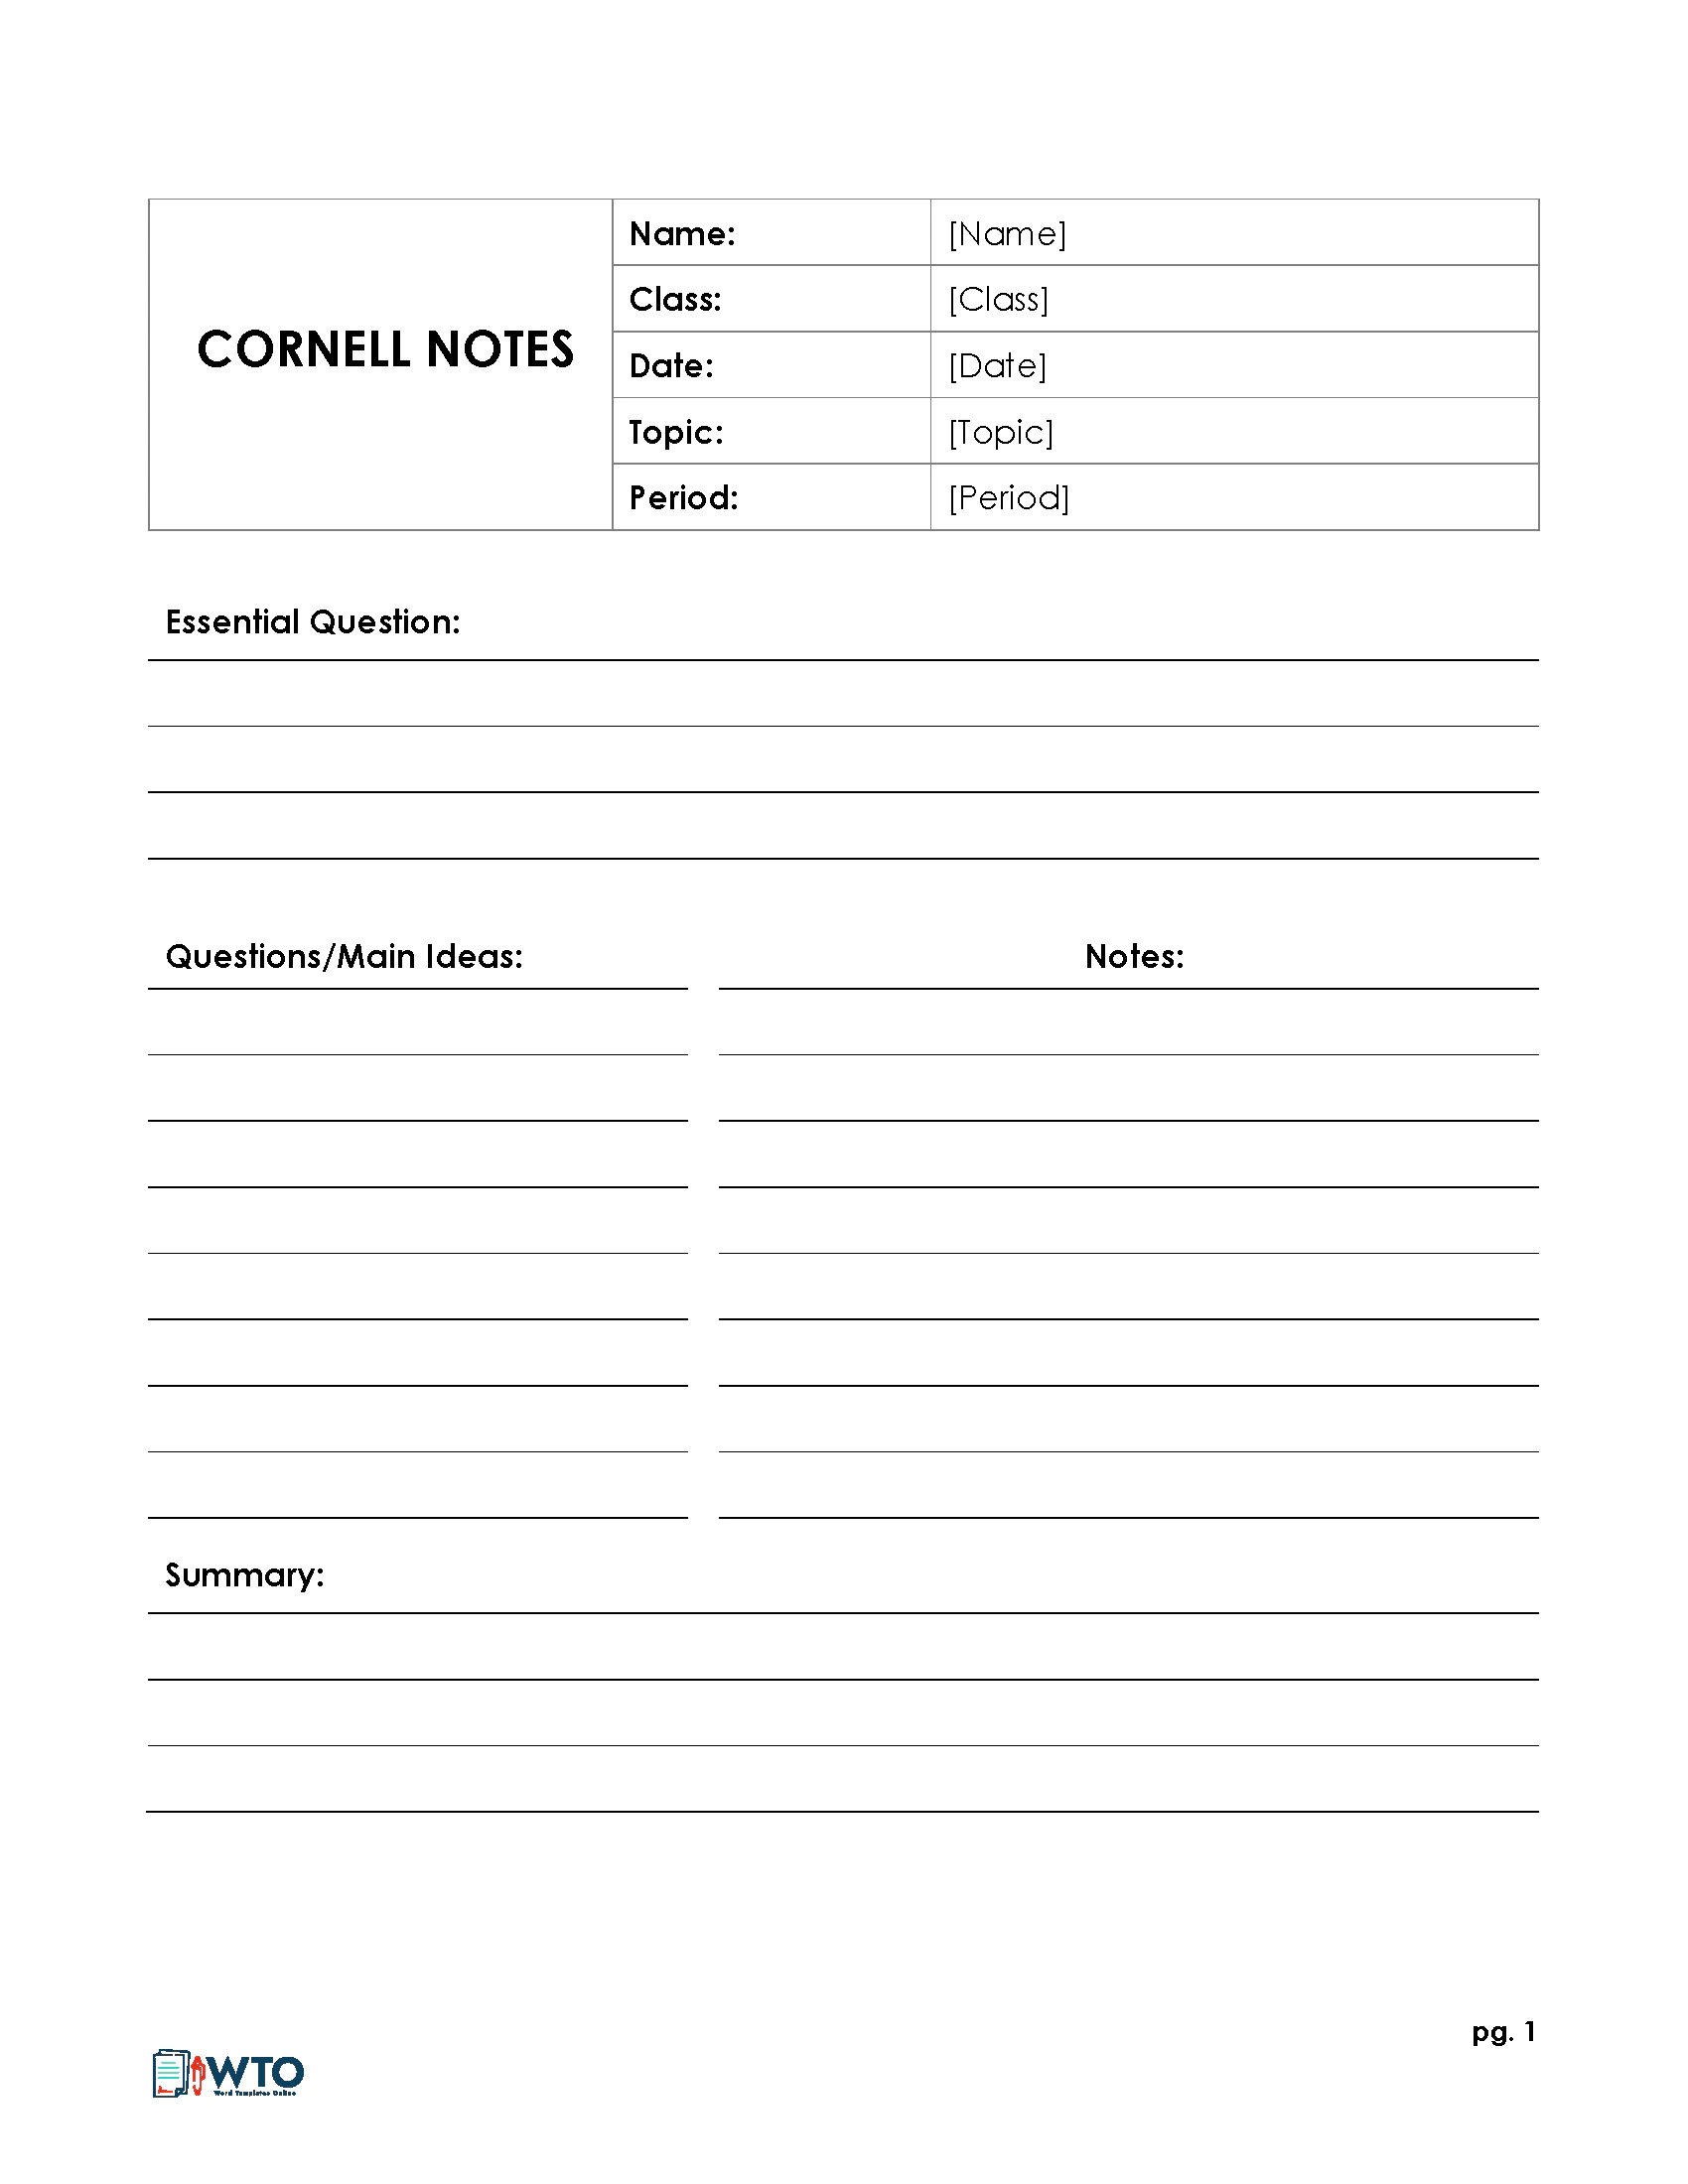 22 Free Cornell Note Templates (Cornell Note Taking Explained) Throughout Cornell Notes Google Docs Template